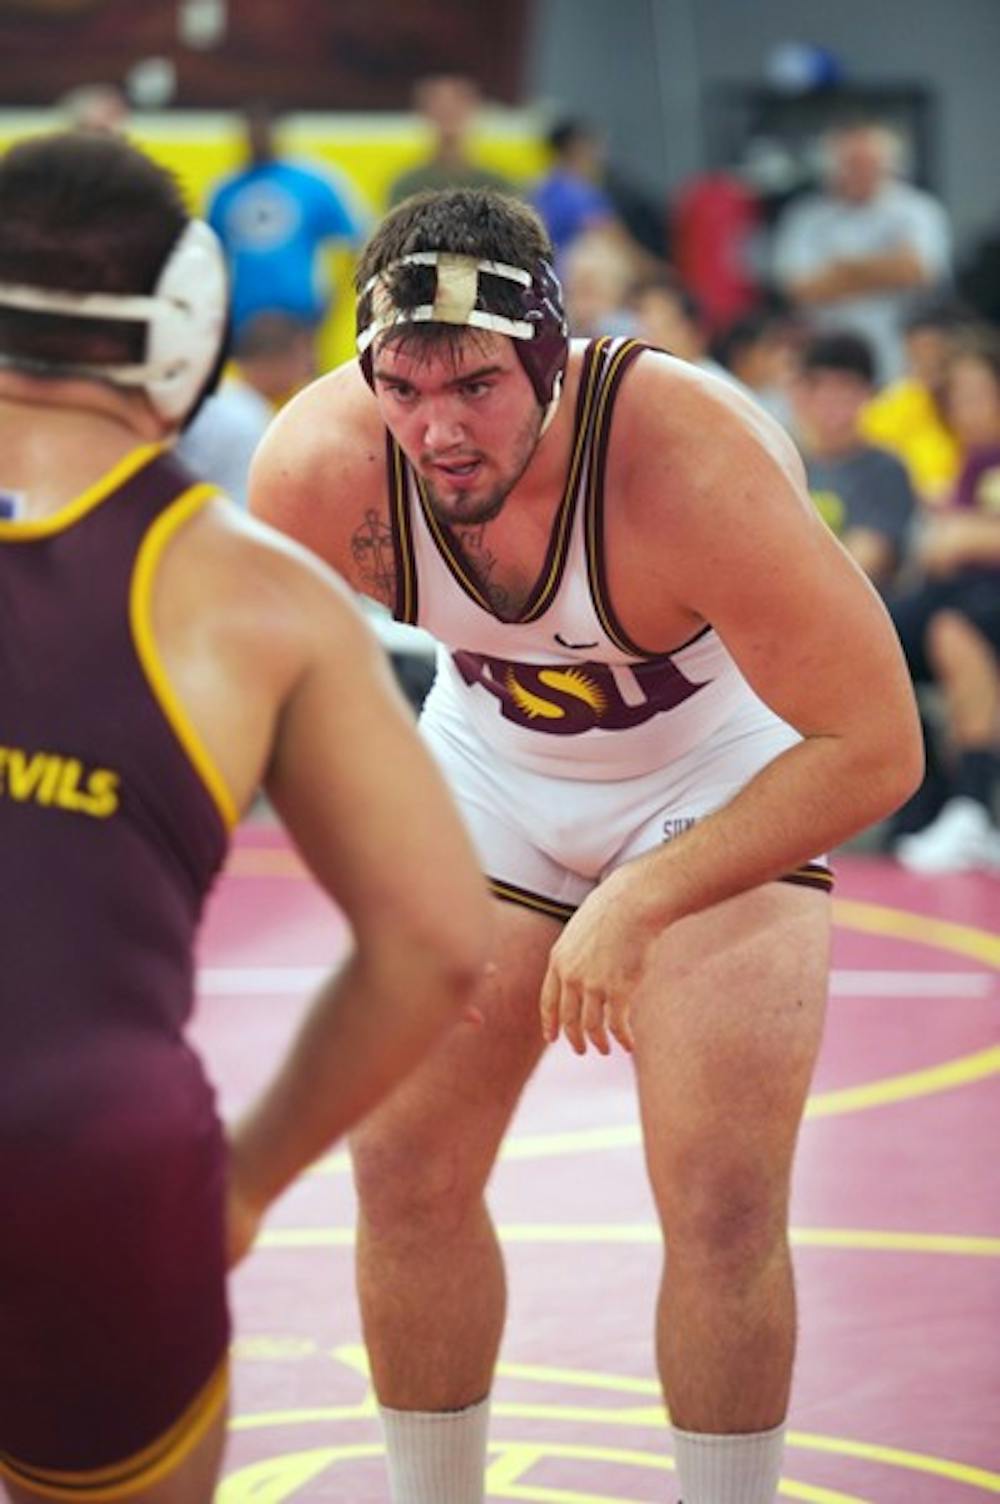 NOT JUST A SCRIMMAGE: ASU redshirt junior Levi Cooper stares down a teammate during a wrestle-off last year. This year’s edition showcased a healthy Cooper and several up-and-coming freshmen. (Photo by Michael Arellano)